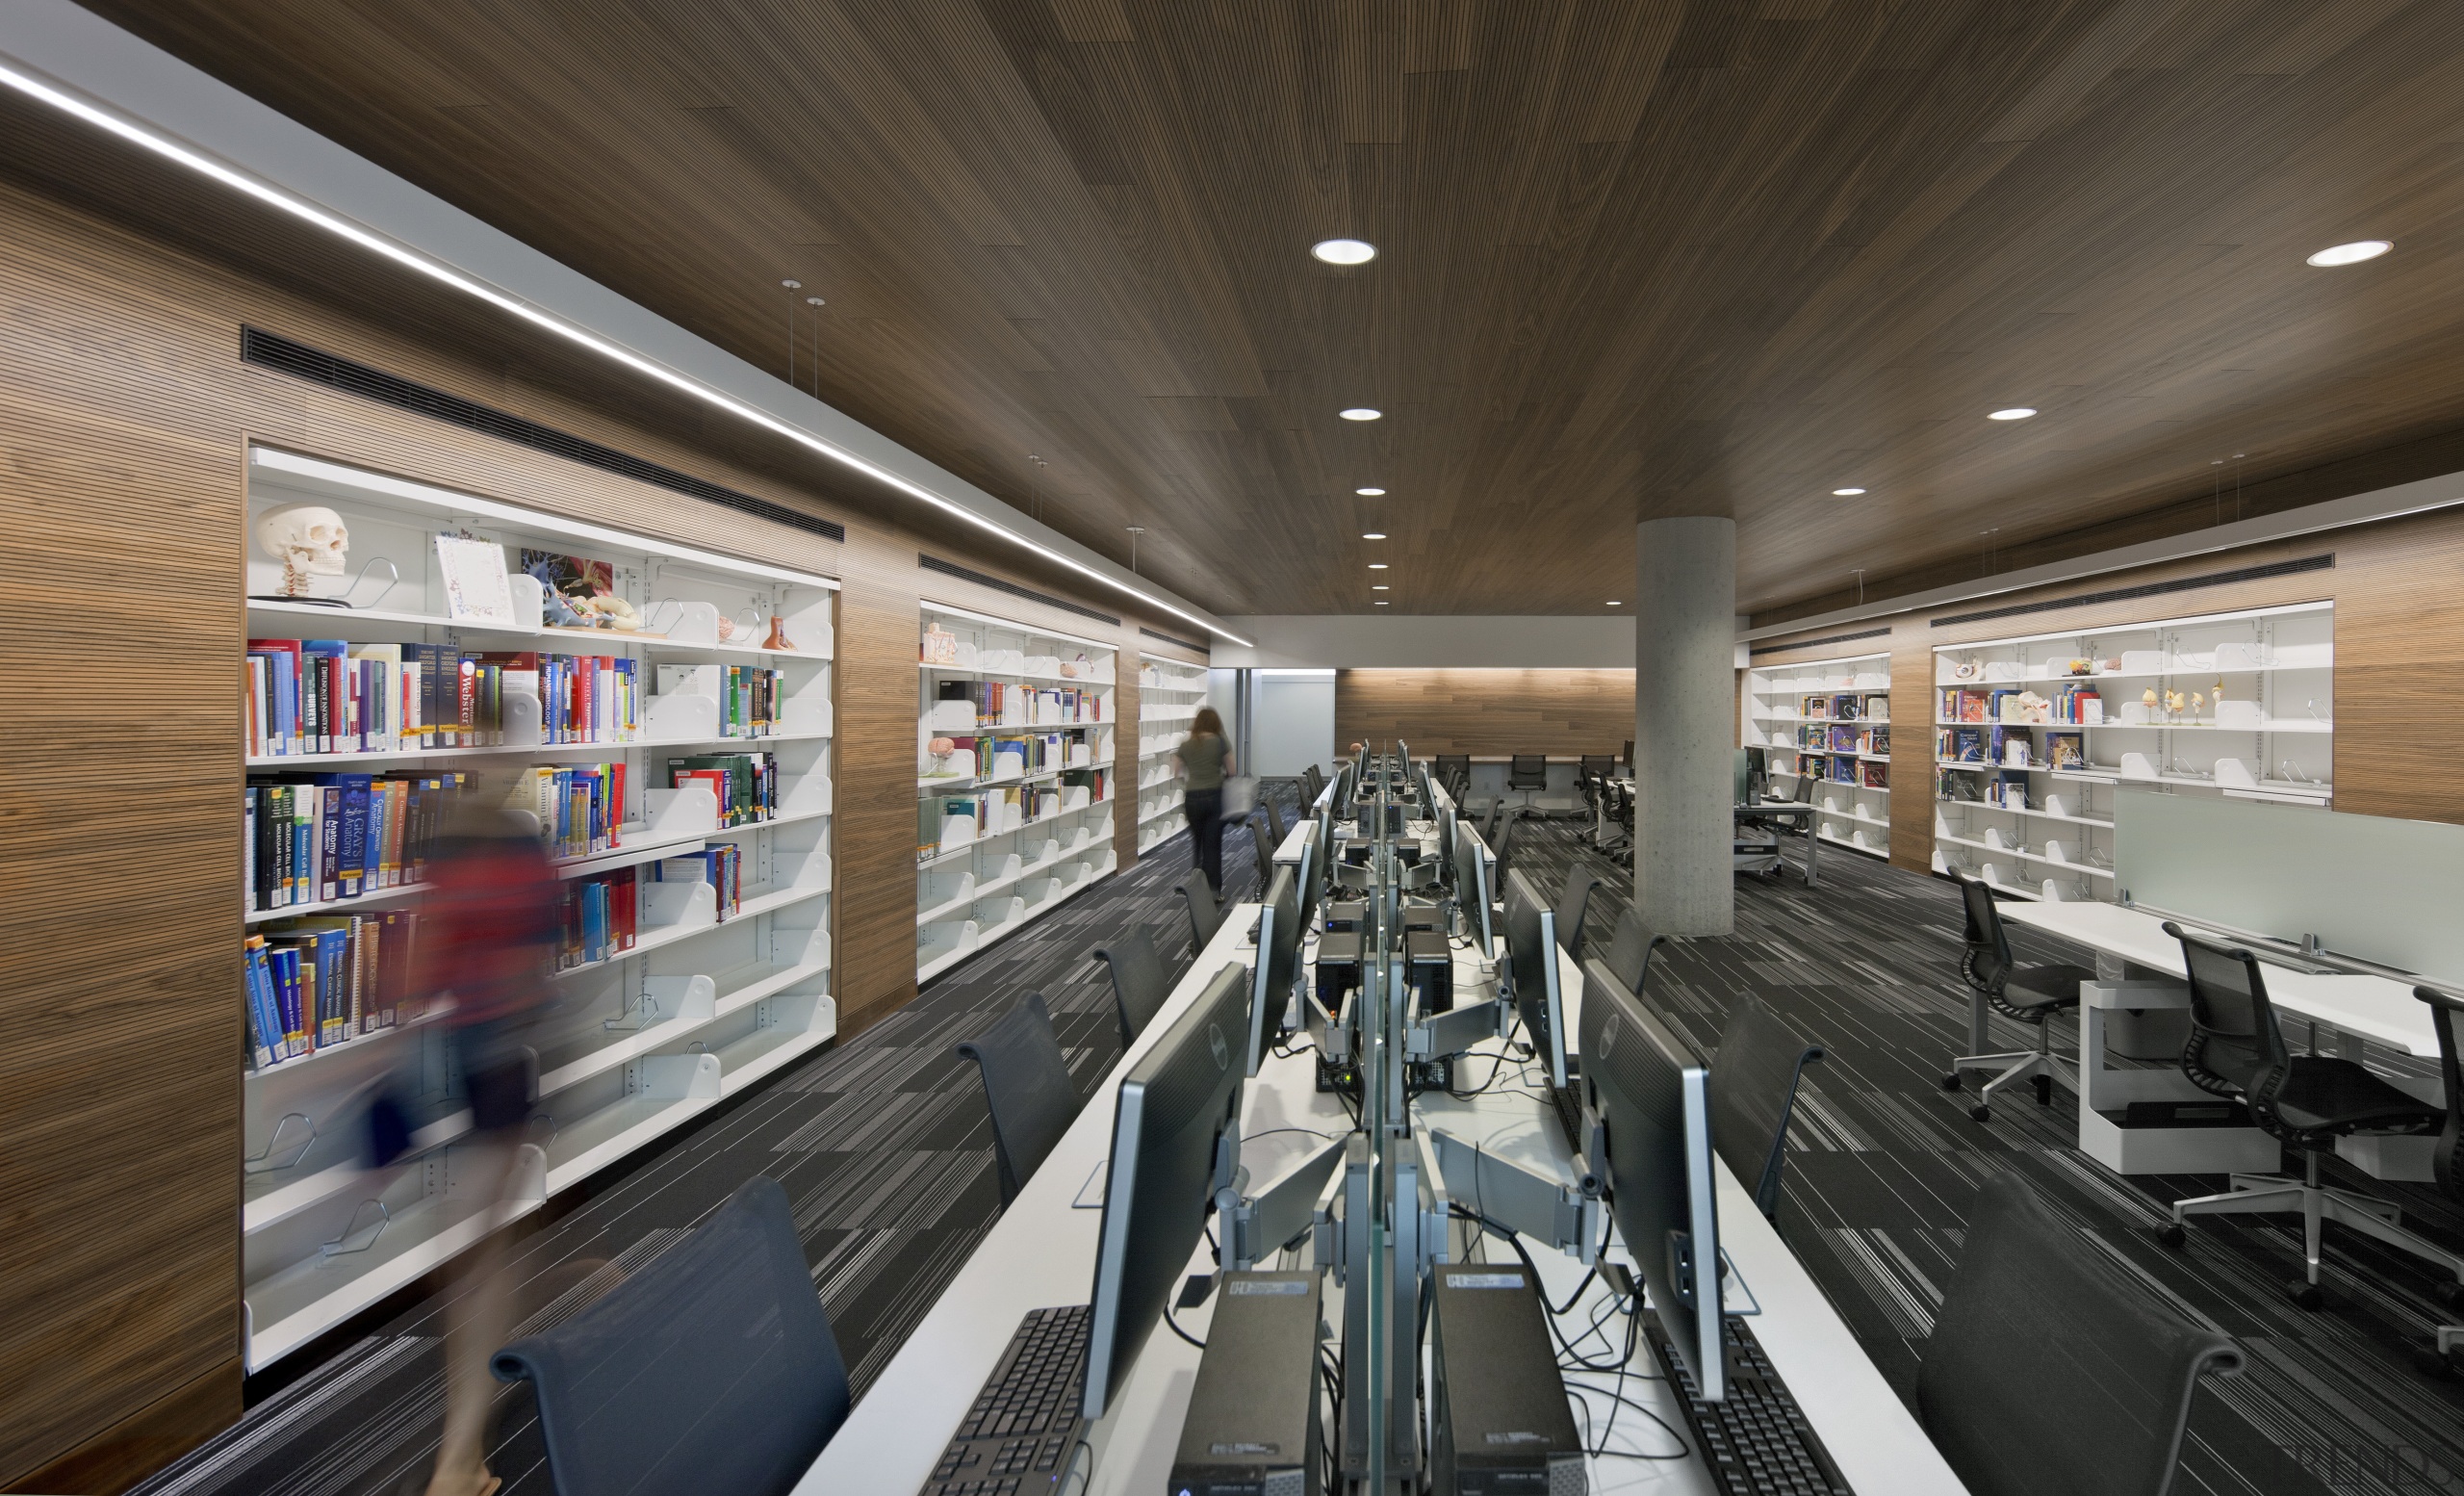 :The second-floor learning commons at this education facility institution, interior design, brown, gray